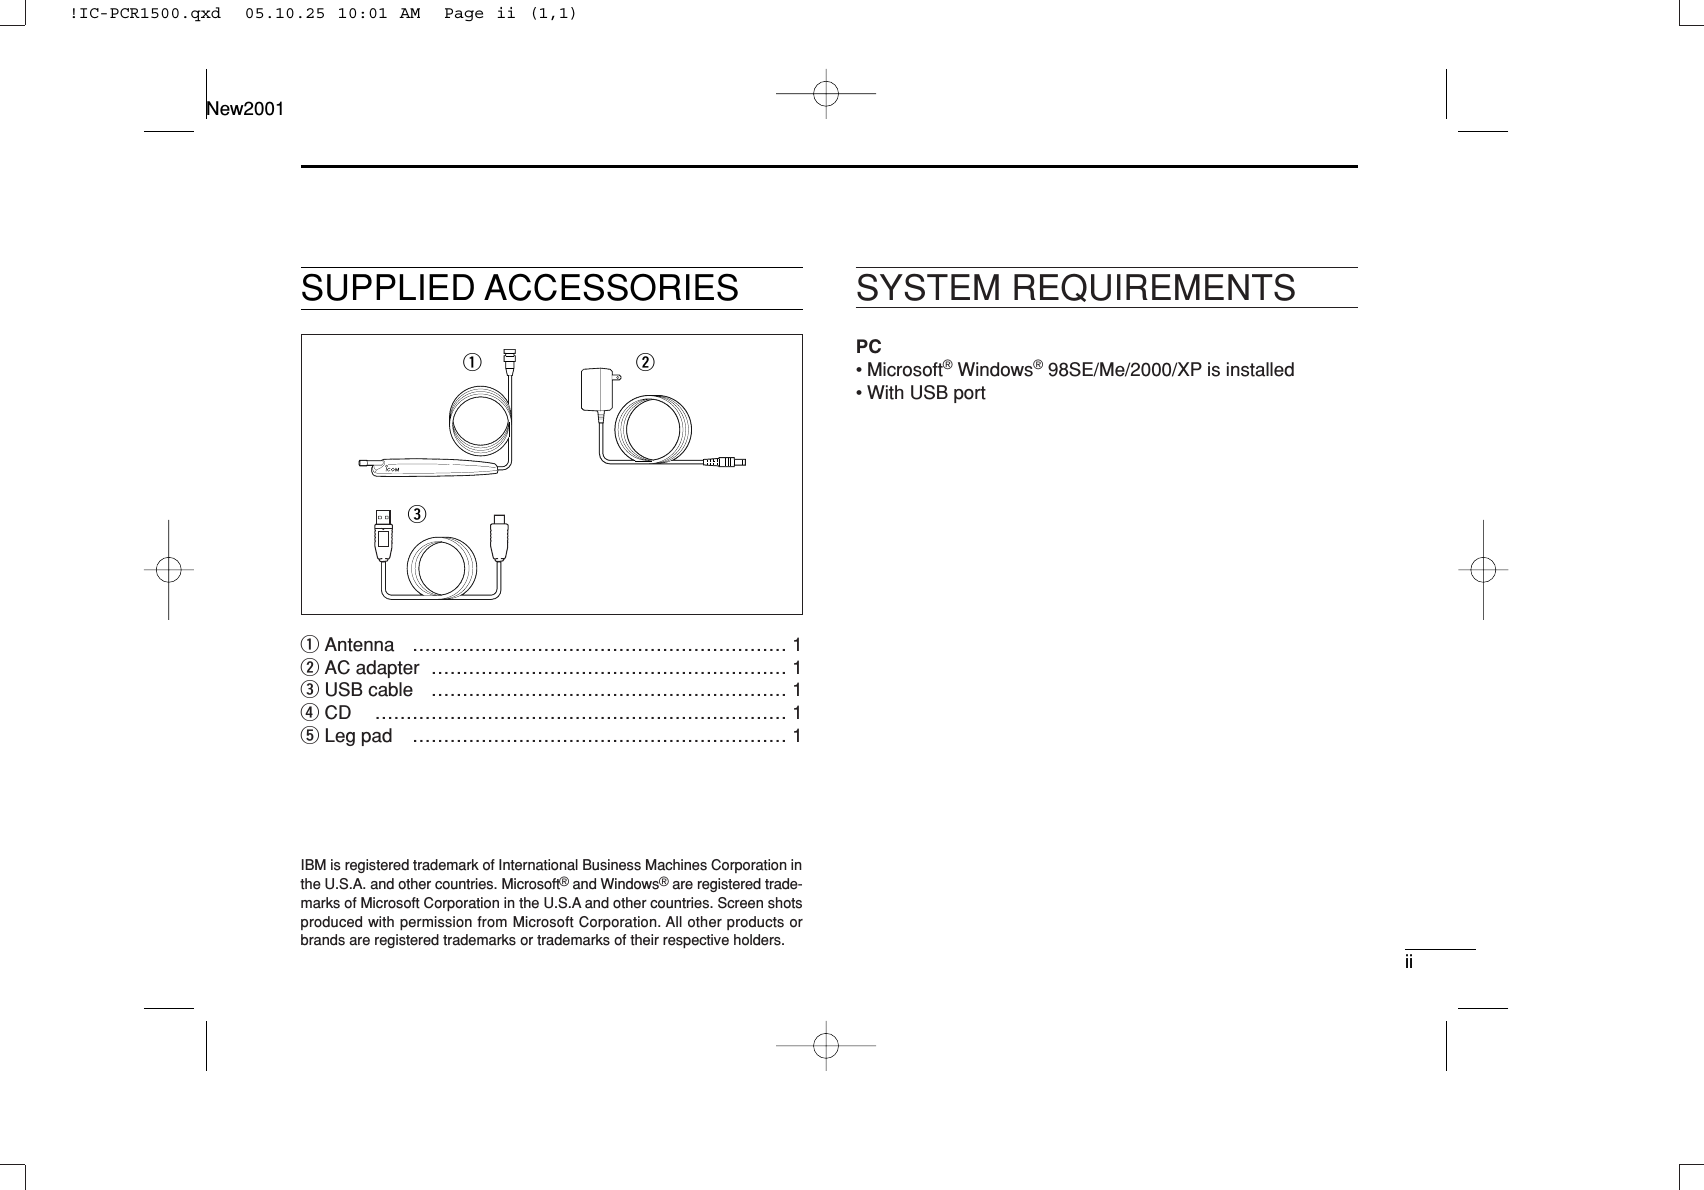 iiNew2001SUPPLIED ACCESSORIESqAntenna …………………………………………………… 1wAC adapter ………………………………………………… 1eUSB cable ………………………………………………… 1rCD ………………………………………………………… 1tLeg pad …………………………………………………… 1SYSTEM REQUIREMENTSPC• Microsoft®Windows®98SE/Me/2000/XP is installed• With USB portqweIBM is registered trademark of International Business Machines Corporation inthe U.S.A. and other countries. Microsoft®and Windows®are registered trade-marks of Microsoft Corporation in the U.S.A and other countries. Screen shotsproduced with permission from Microsoft Corporation. All other products orbrands are registered trademarks or trademarks of their respective holders.!IC-PCR1500.qxd  05.10.25 10:01 AM  Page ii (1,1)